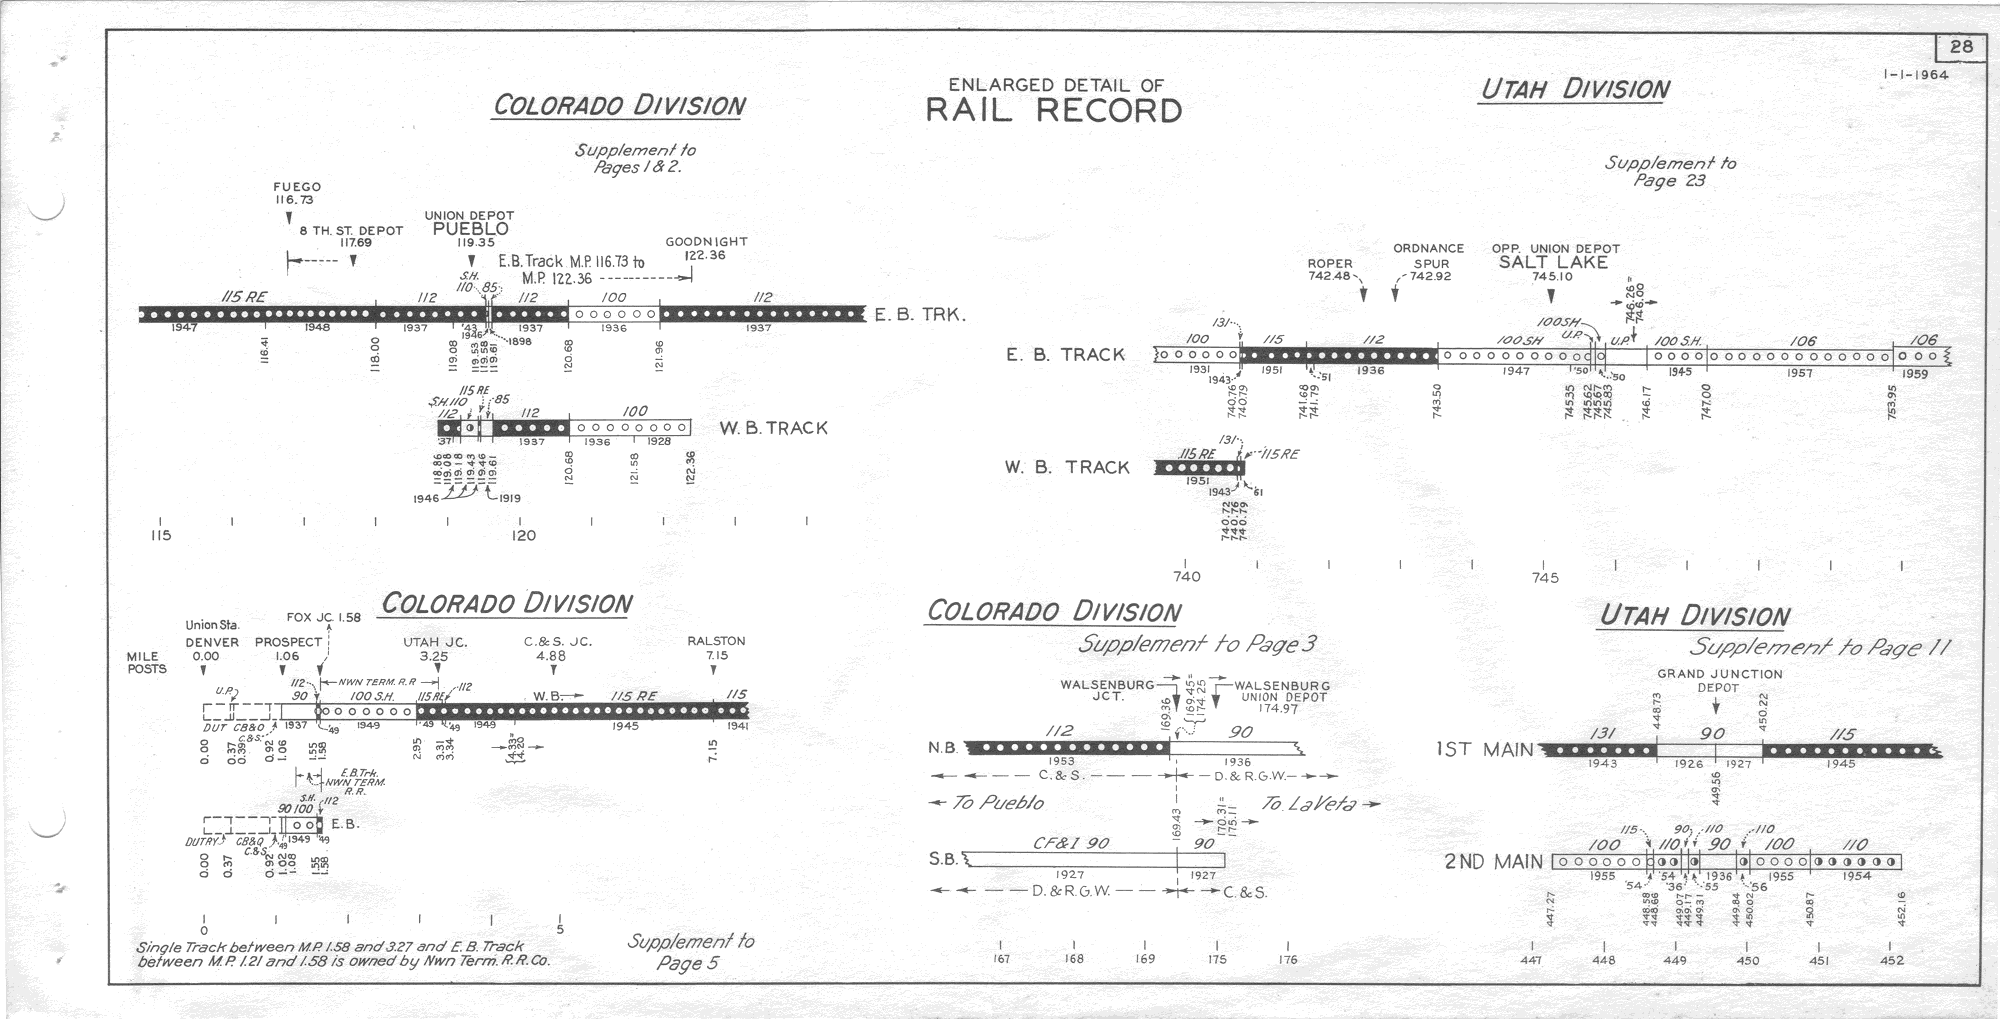 drgw_profile_1964_p28.png